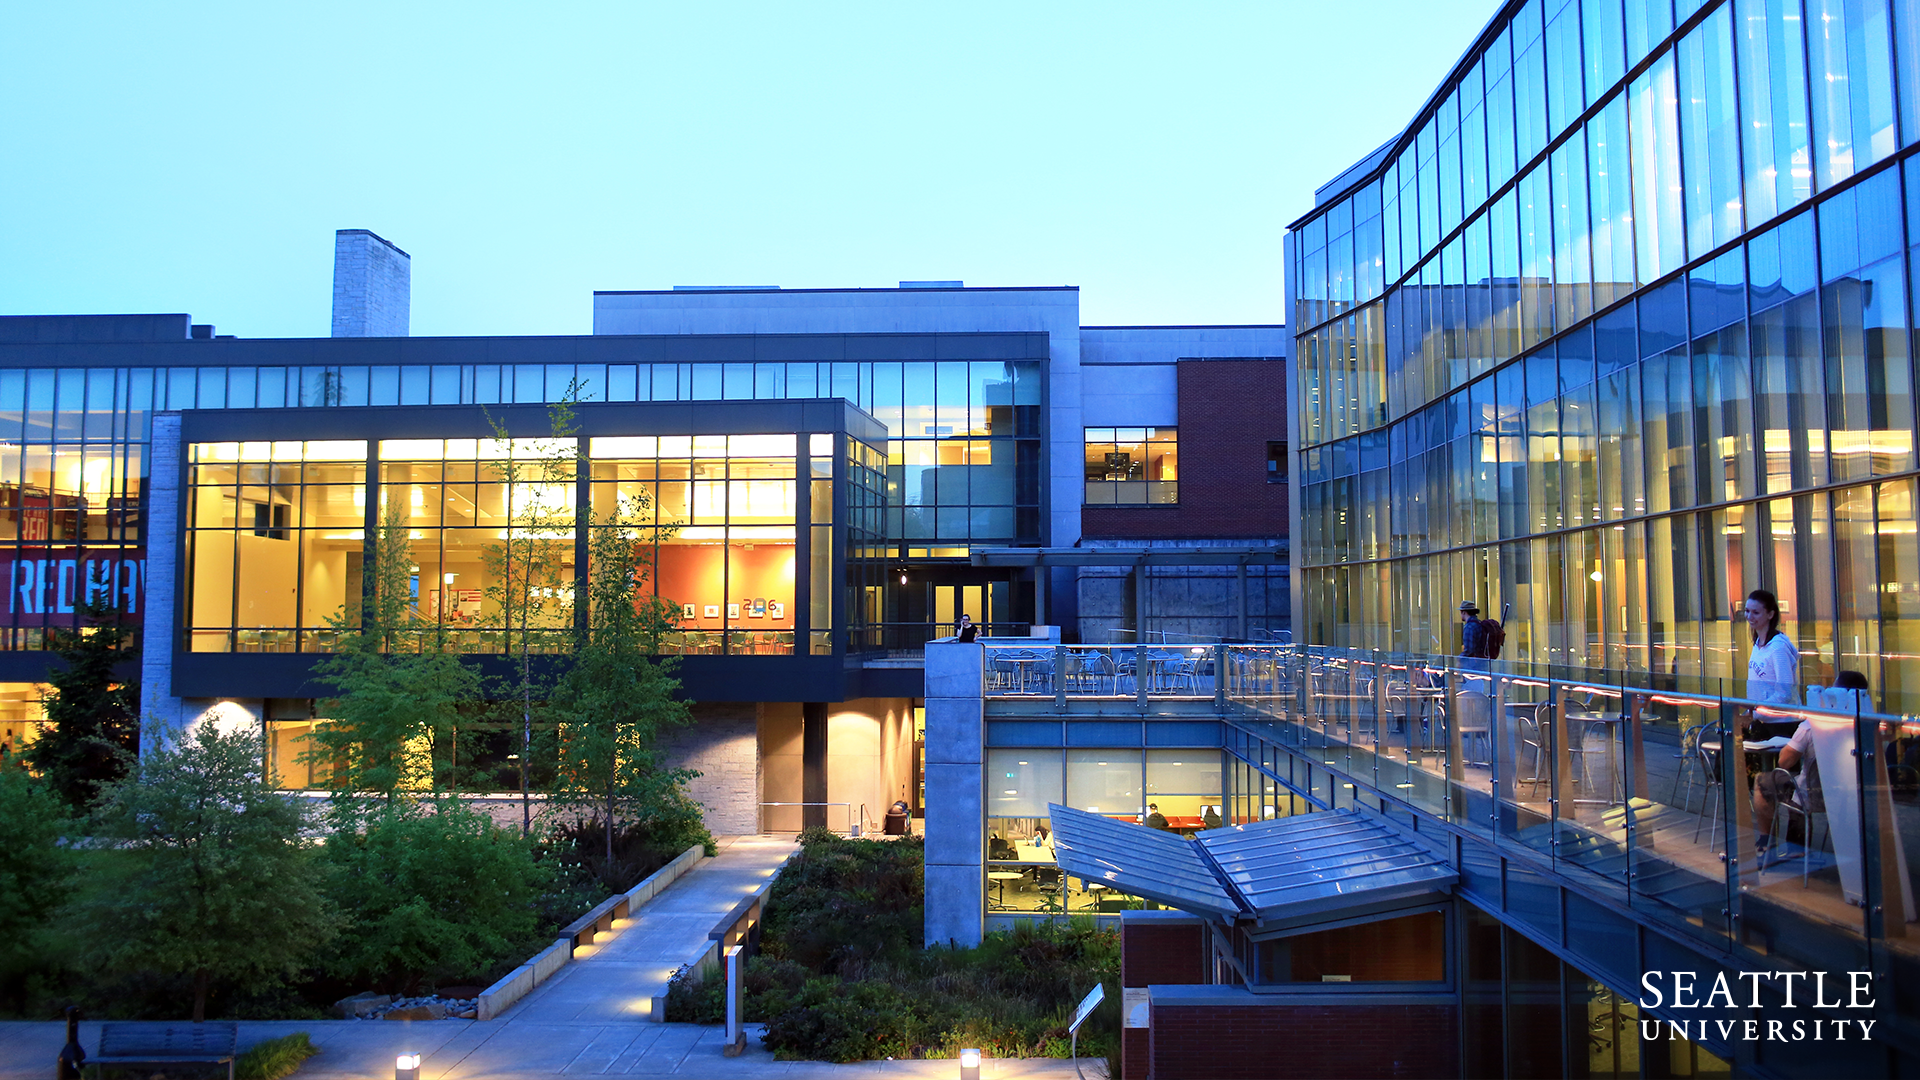 Student Center and Library Exterior at Dusk